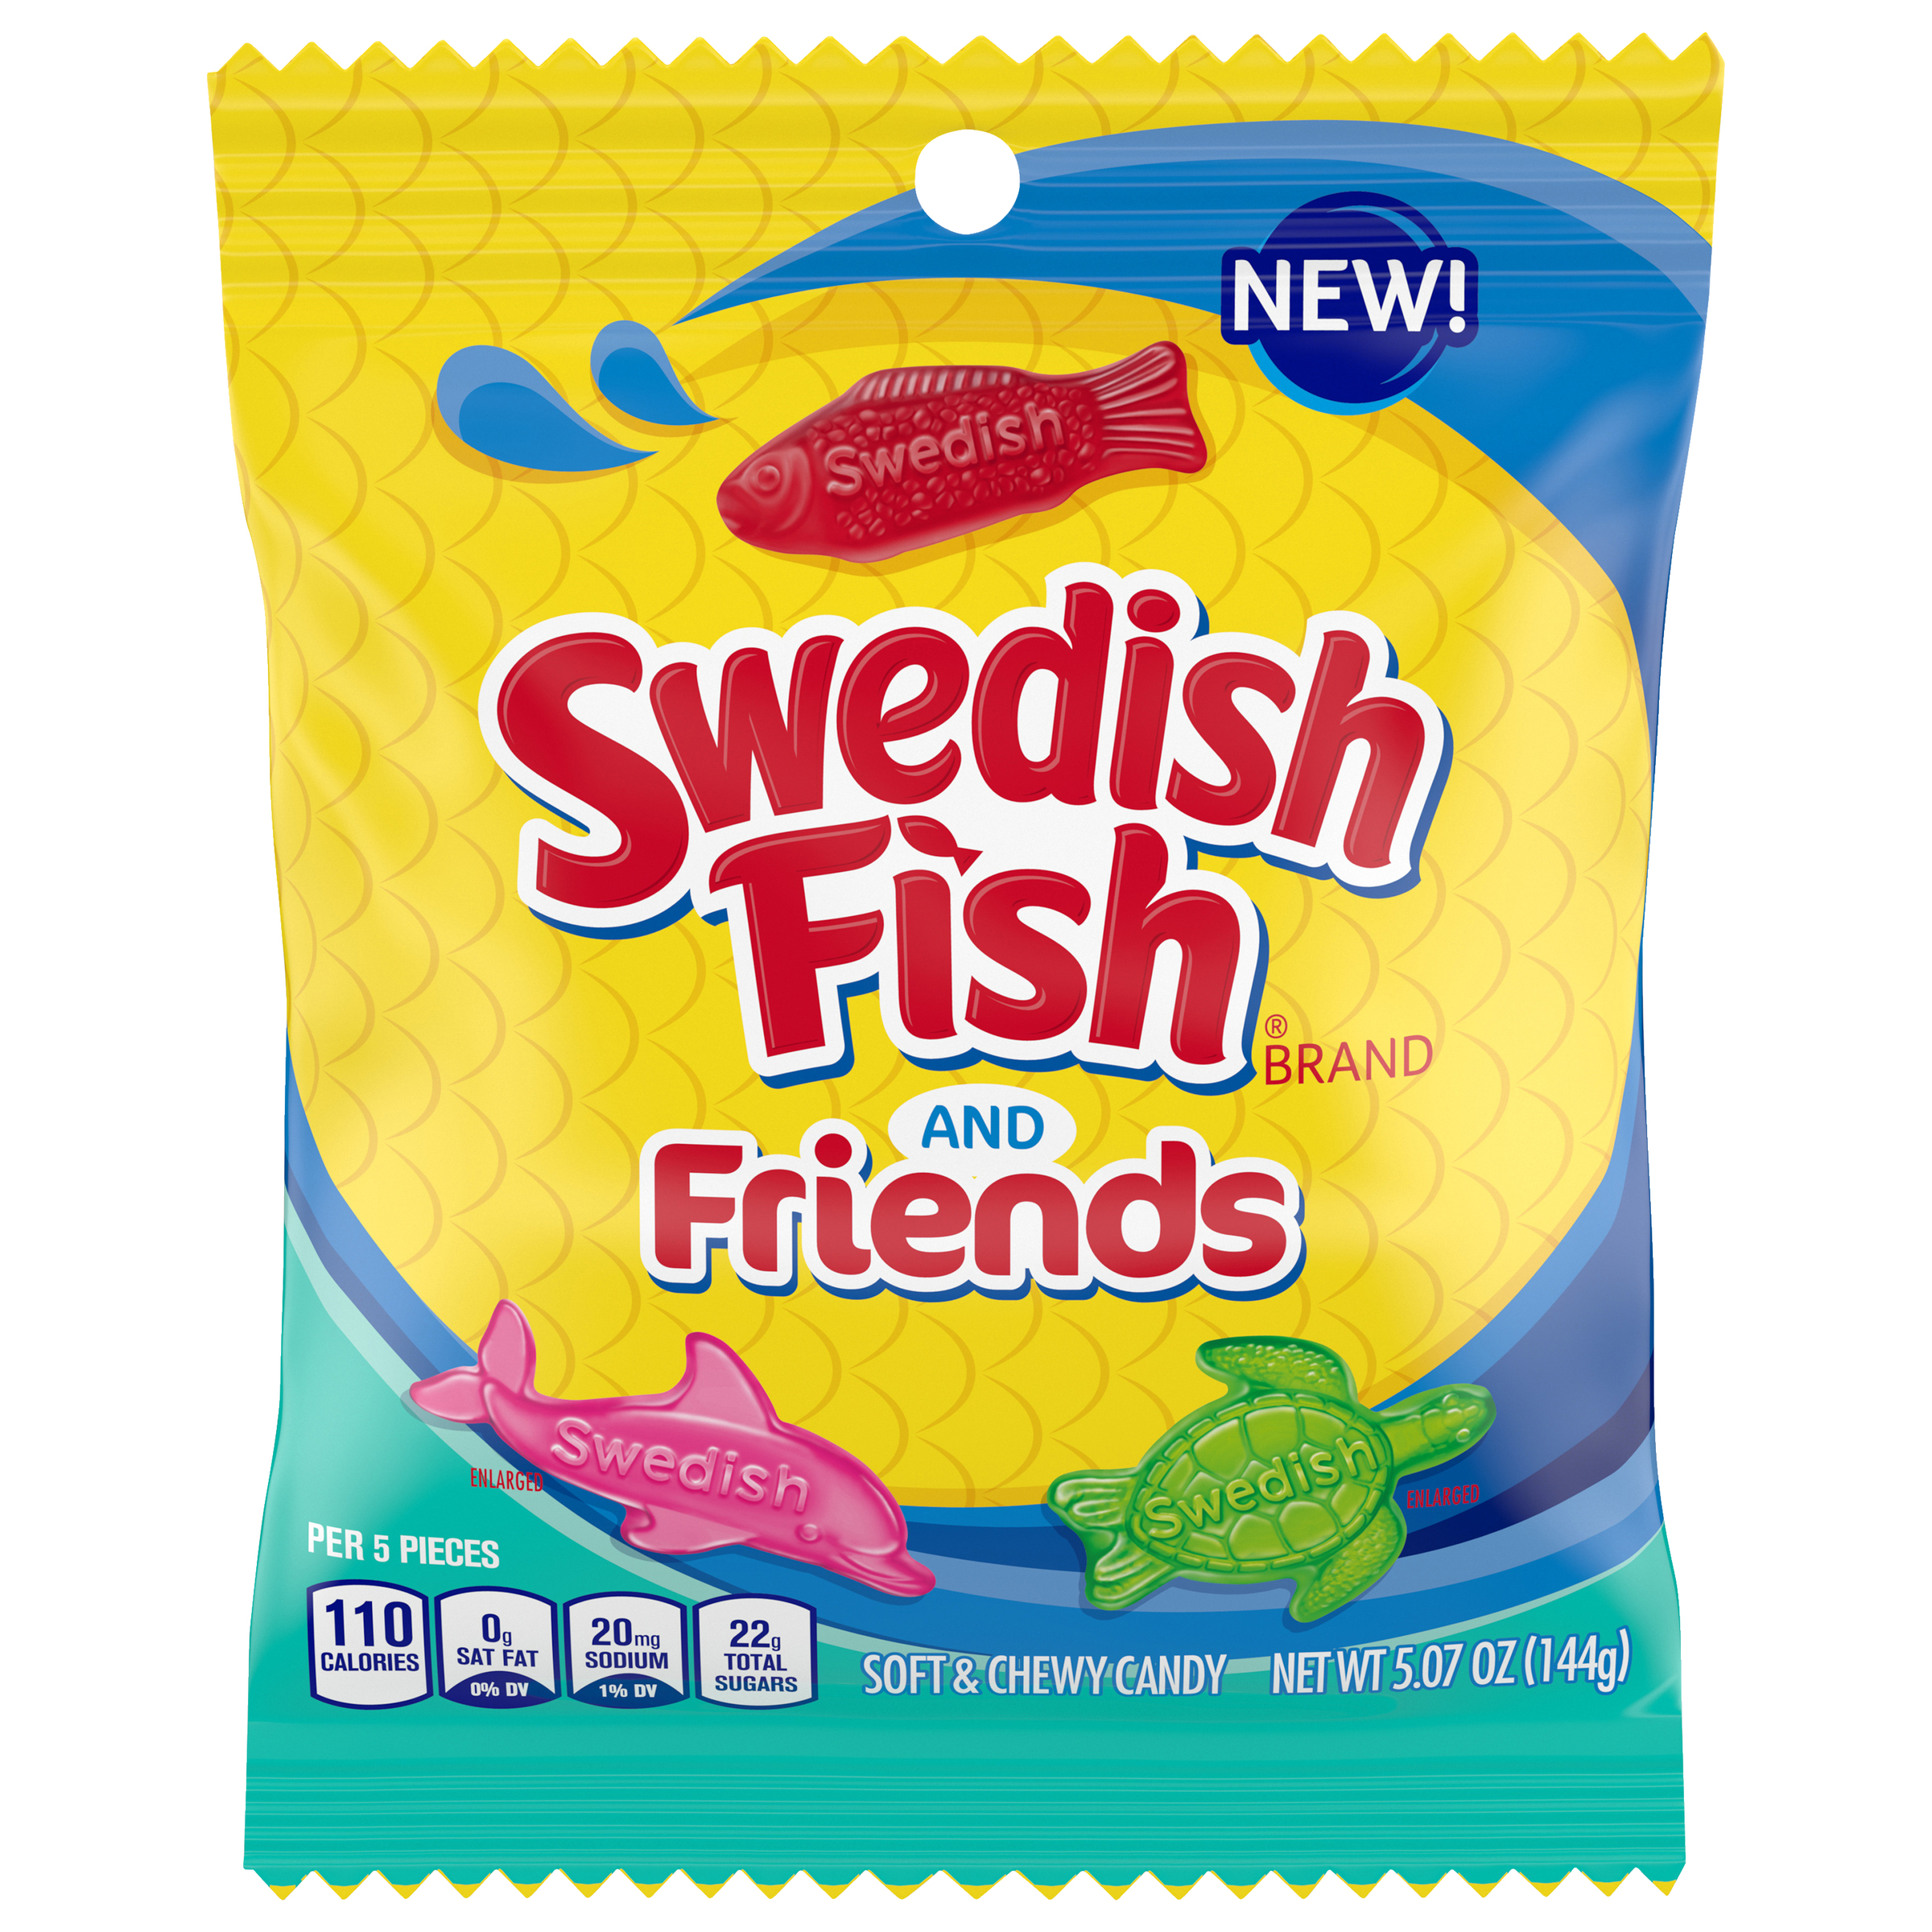 SWEDISH FISH and Friends Soft & Chewy Candy, 5.07 oz